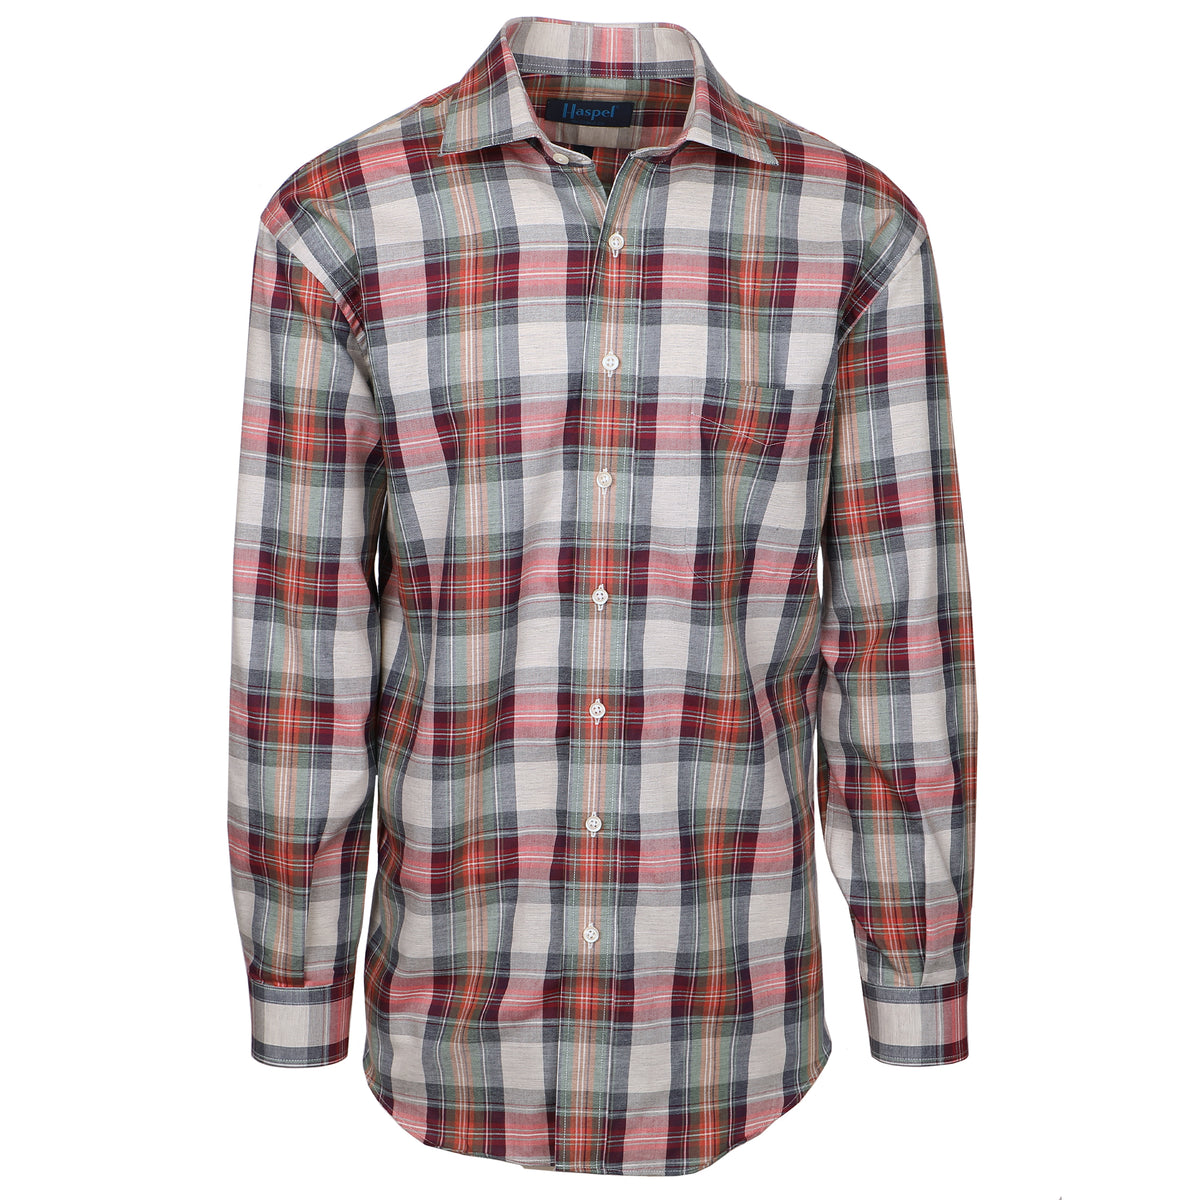 Classic plaid on soft brushed cotton. The lightweight look of the season.  100% Cotton • Long Sleeve • Spread Collar • Chest Pocket • Classic Fit 